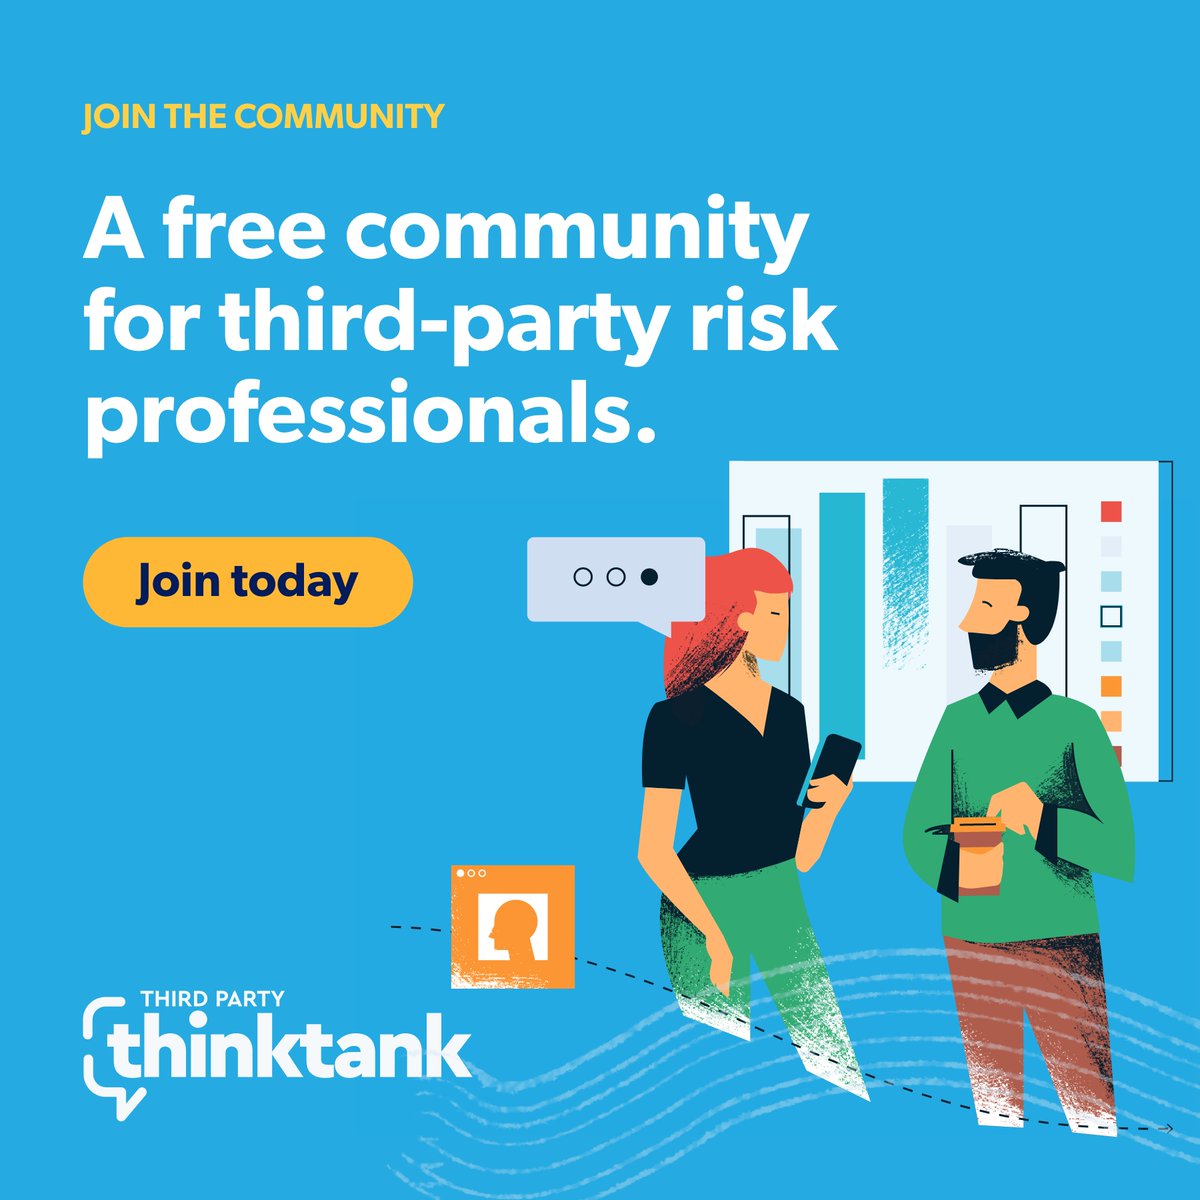 Love learning a lot very quickly? So do we! Check out the #podcast library in Third Party ThinkTank to listen to hundreds of #TPRM related podcasts: hubs.ly/Q02tvF5n0 #vendorrisk #vendormanagement #thirdpartyrisk